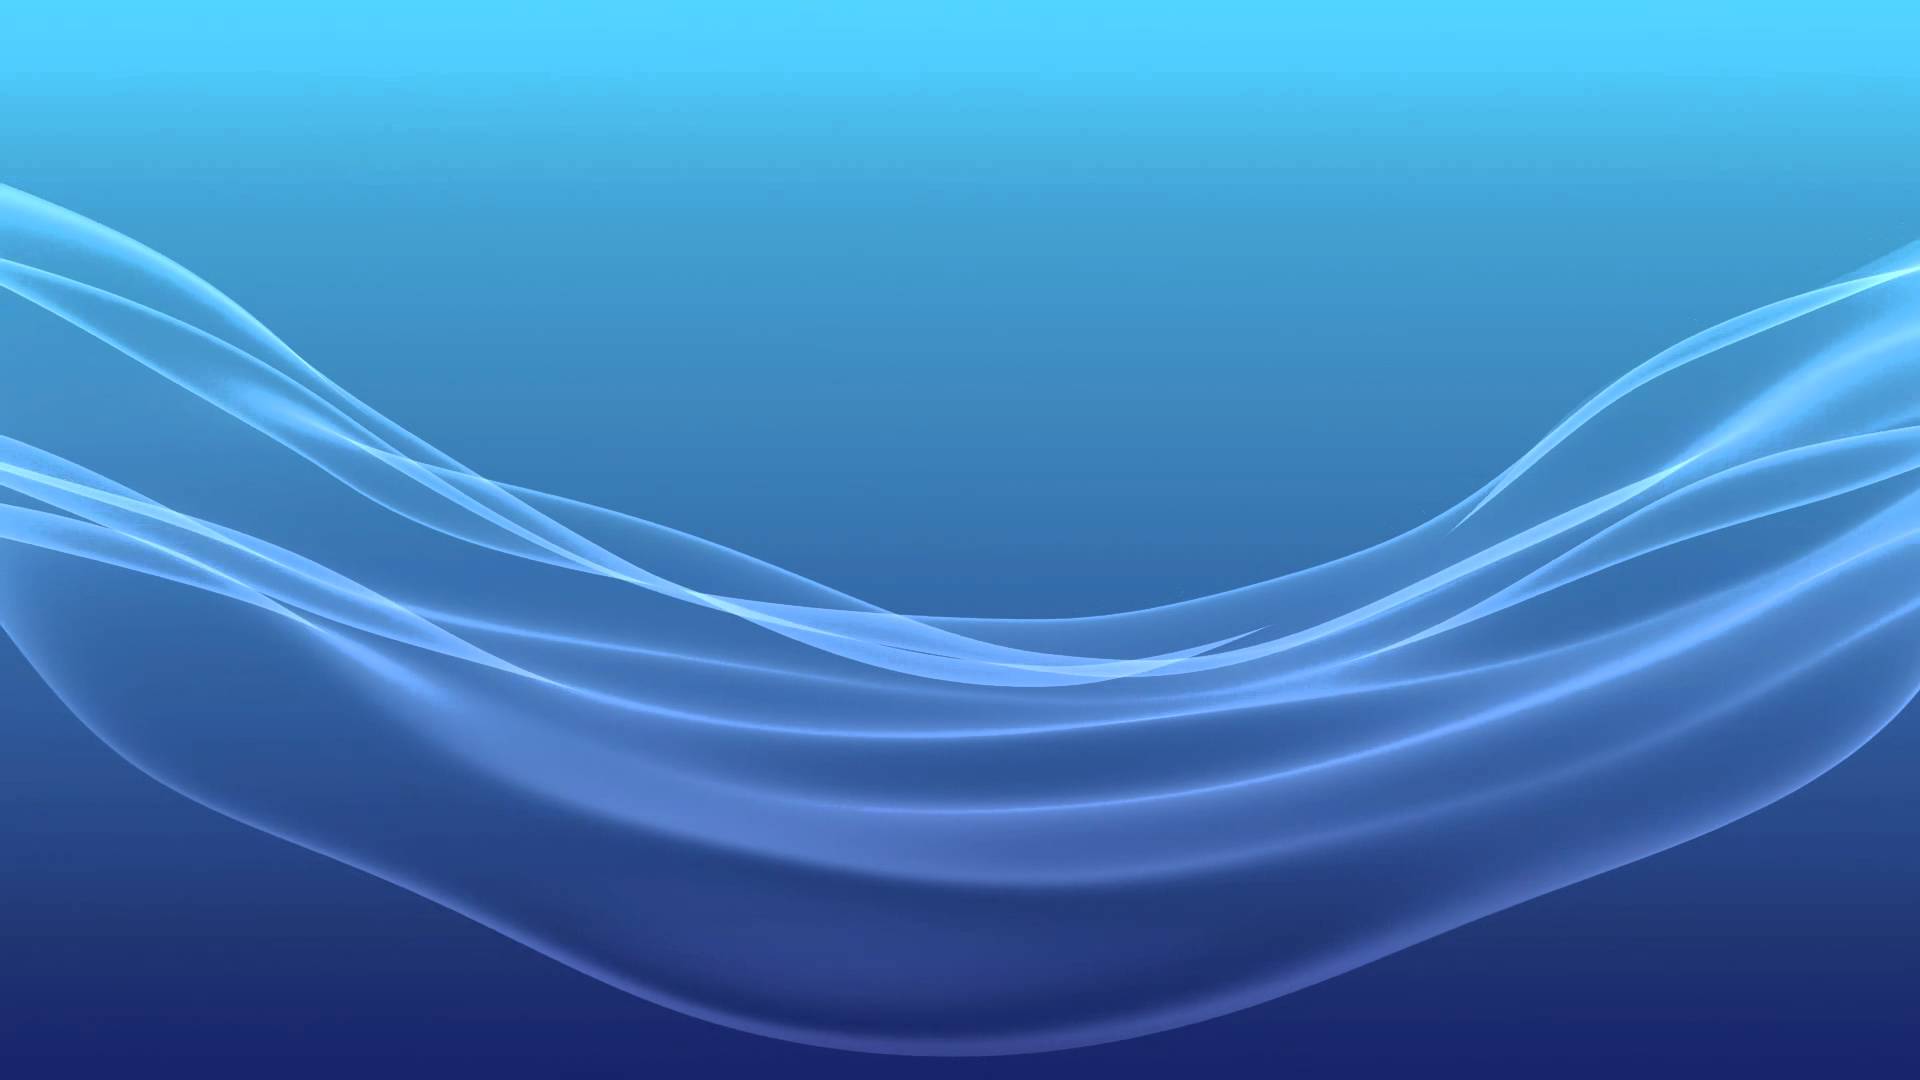 PS3 Background Waves Attempt HD - YouTube